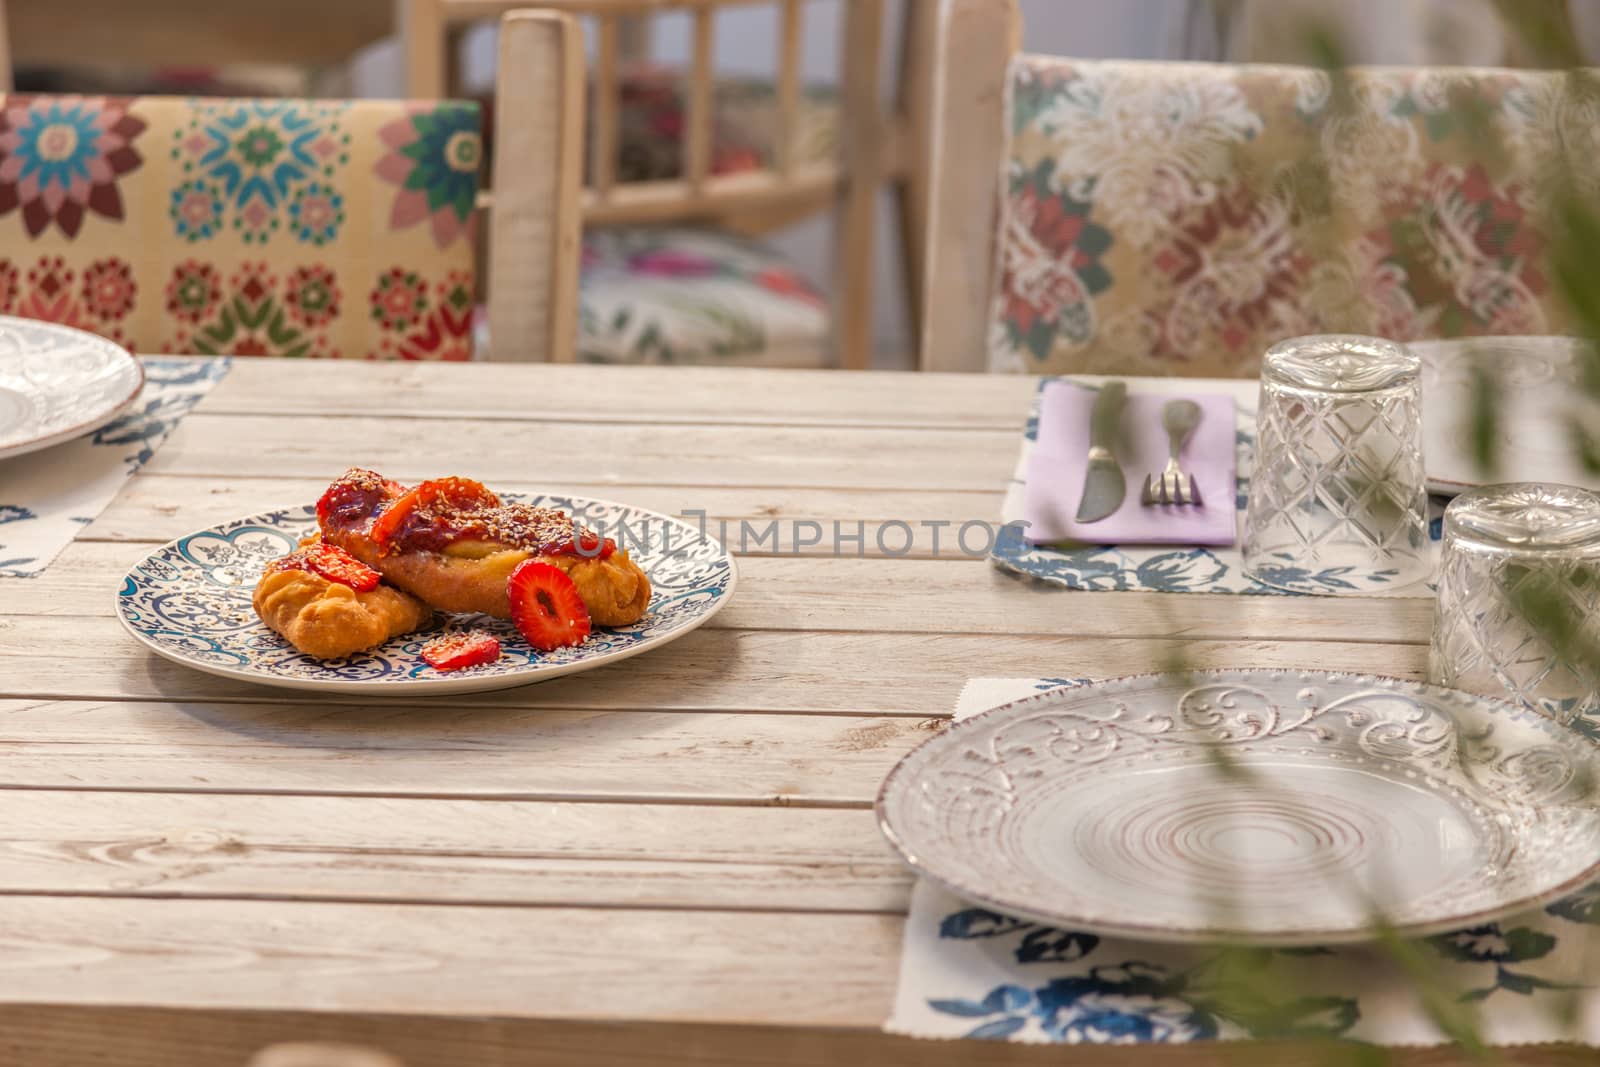 Gourmet greek cheese pie with tomato marmelade and strawberries served on a plate with pattern